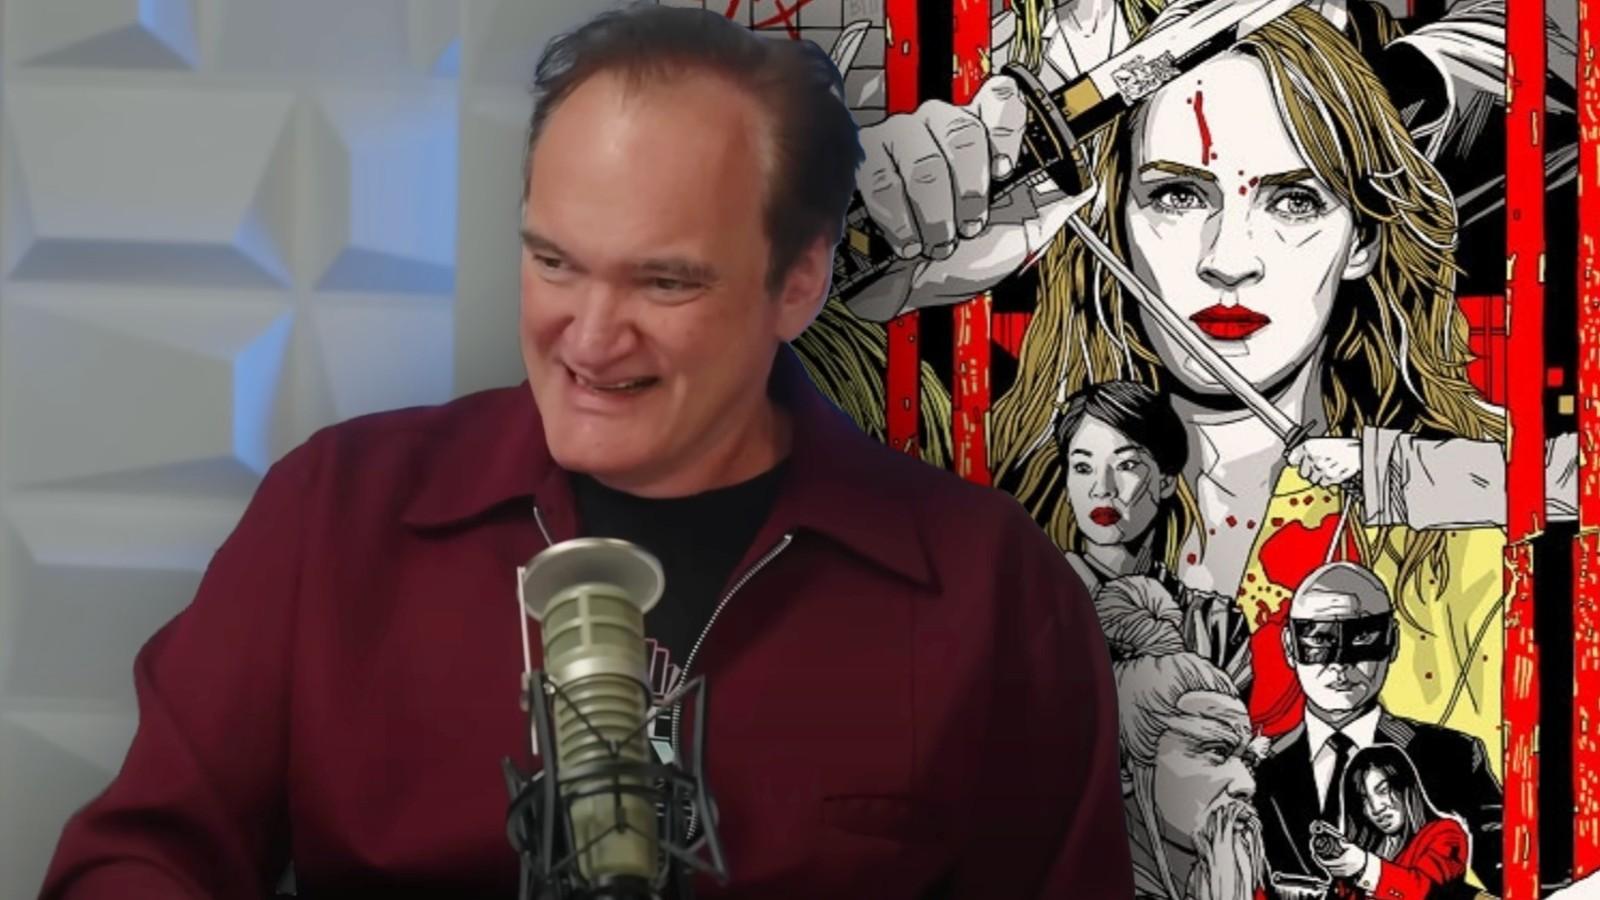 Quentin Tarantino and a poster for Kill Bill: The Whole Bloody Affair